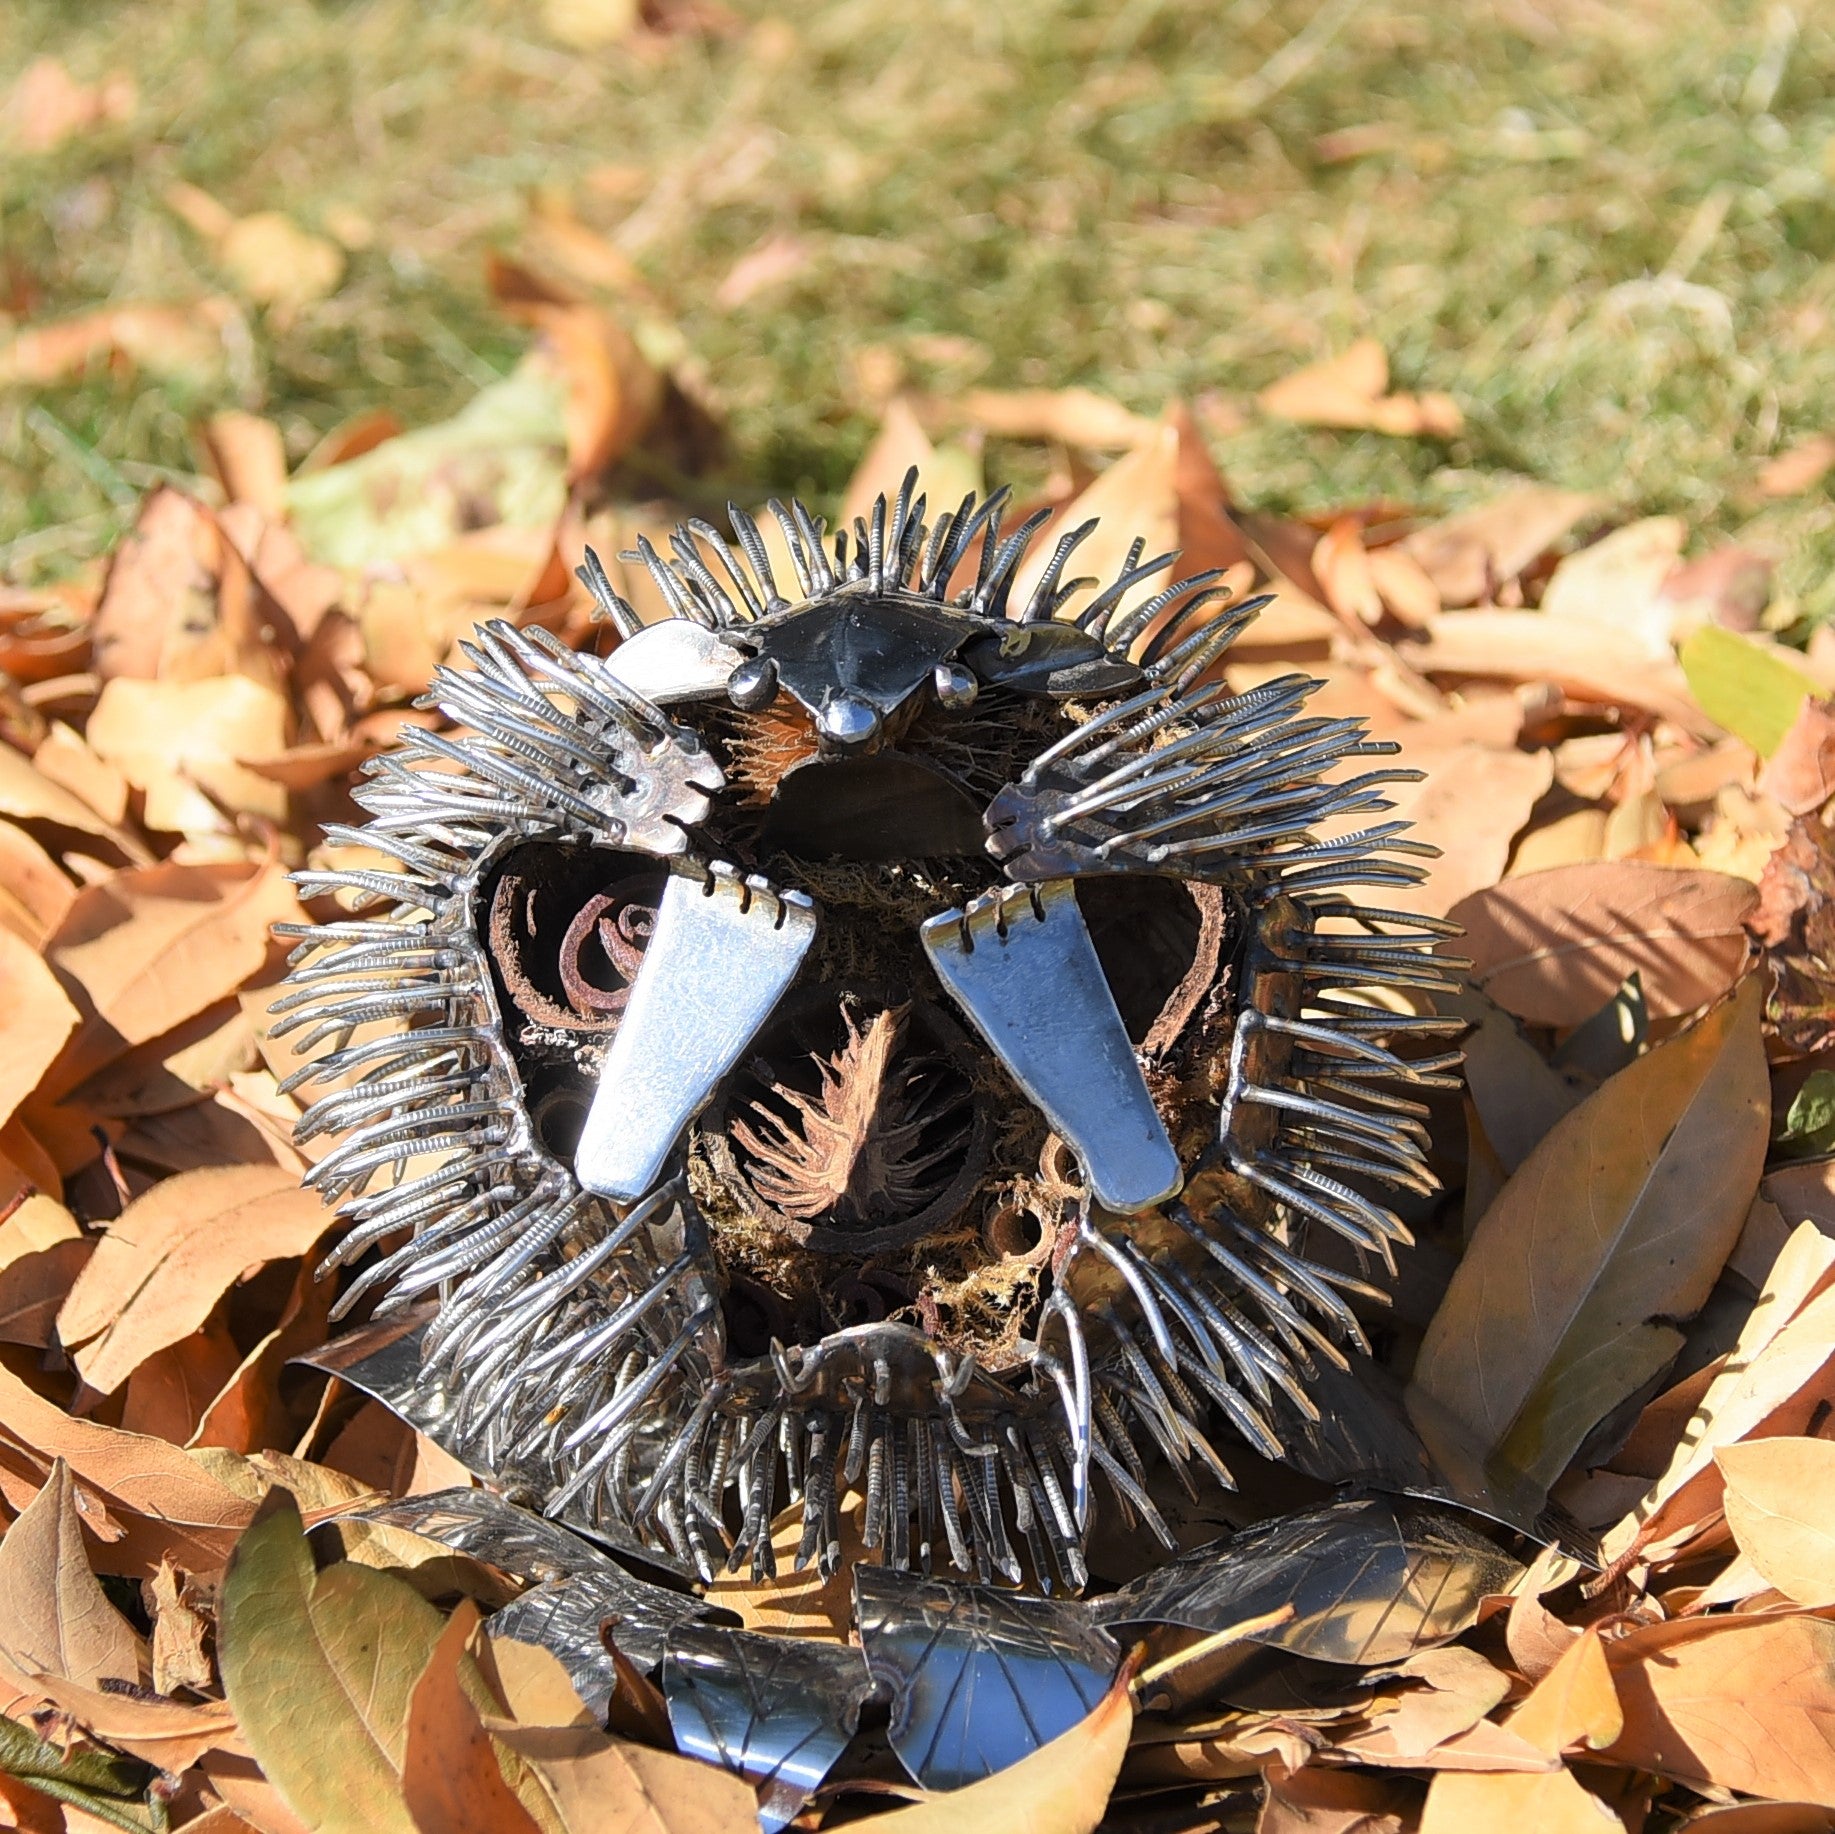 Hedgehog made from stainless steel, curled up in a ball